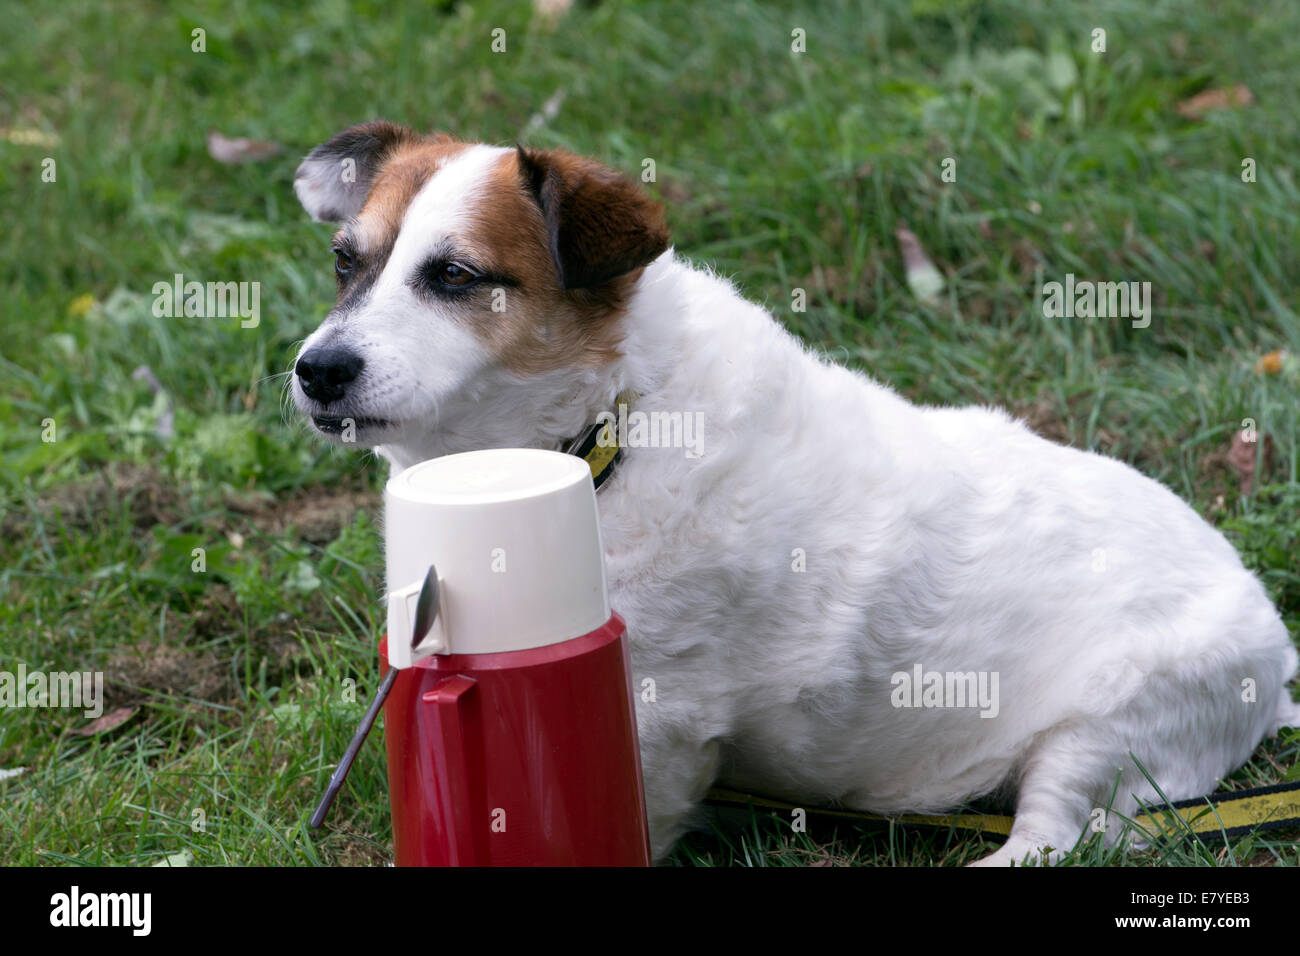 https://c8.alamy.com/comp/E7YEB3/an-old-dog-and-a-thermos-flask-E7YEB3.jpg